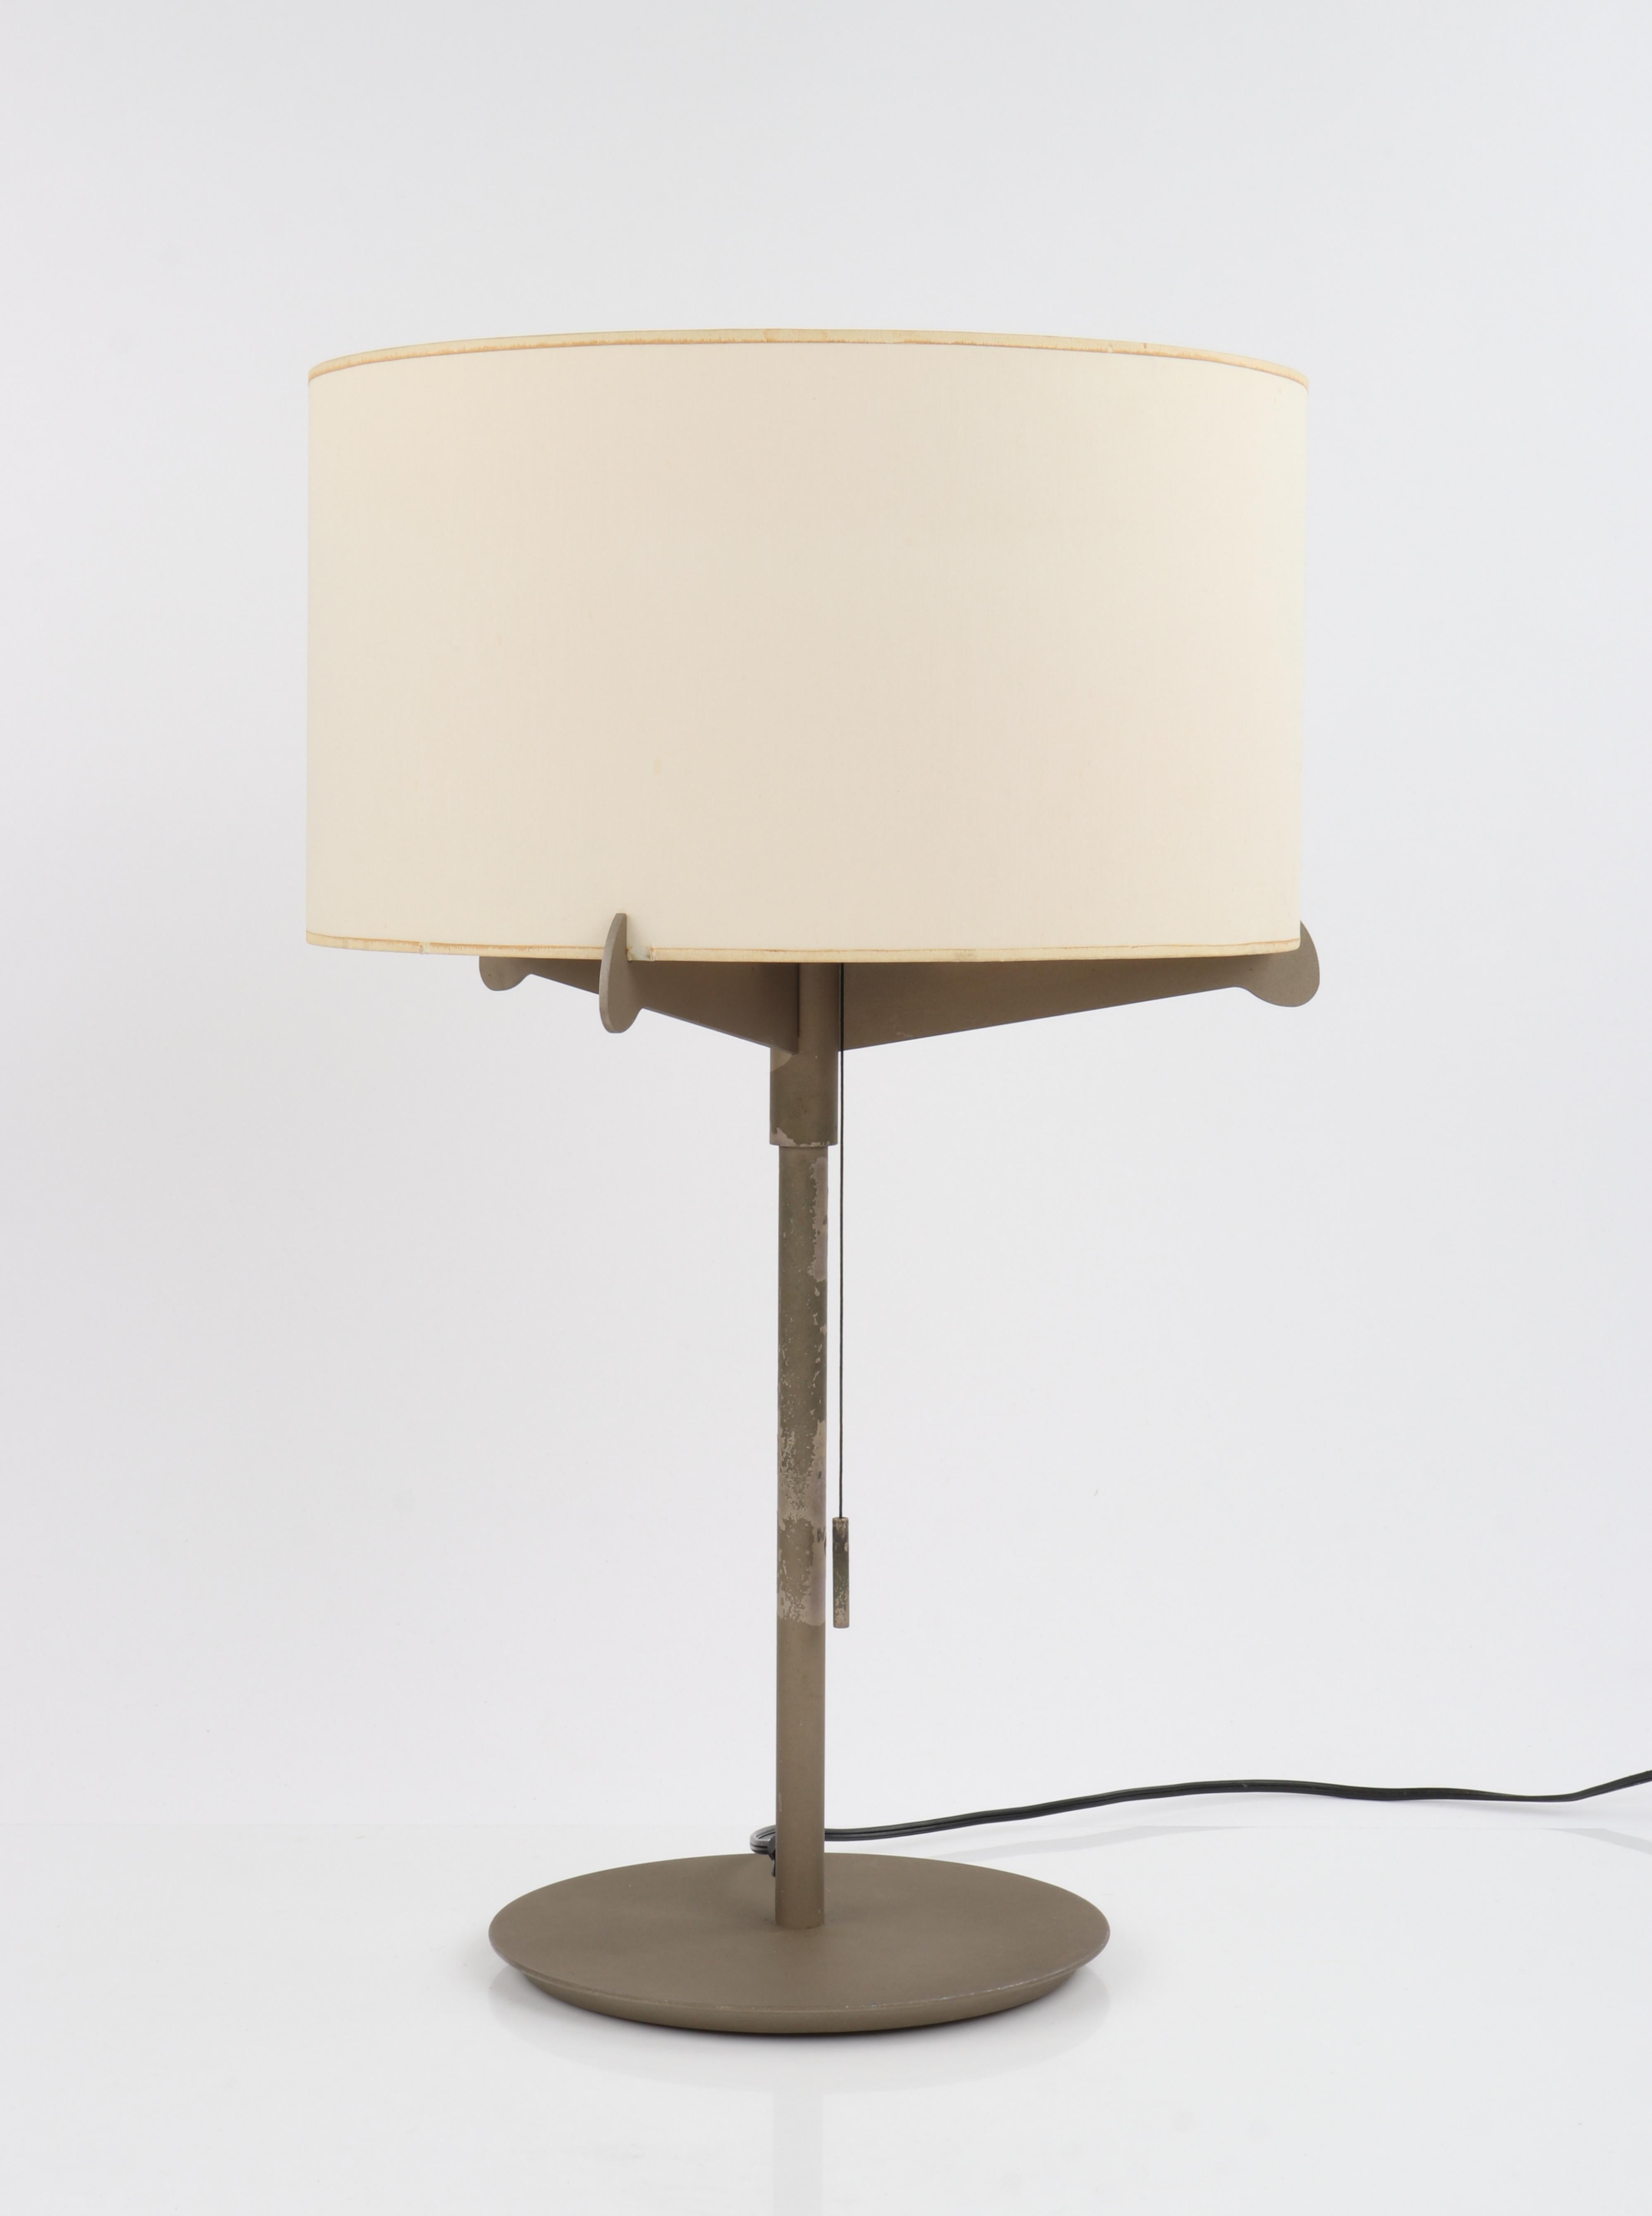 This sleek vintage table lamp combines an Industrial Mid-Century Modern aesthetic with contemporary Spanish style. Designed by Gabriel Teixido for Carpyen, circa 1974. Its tailored silhouette is crafted of a coated metal that begins with a raised